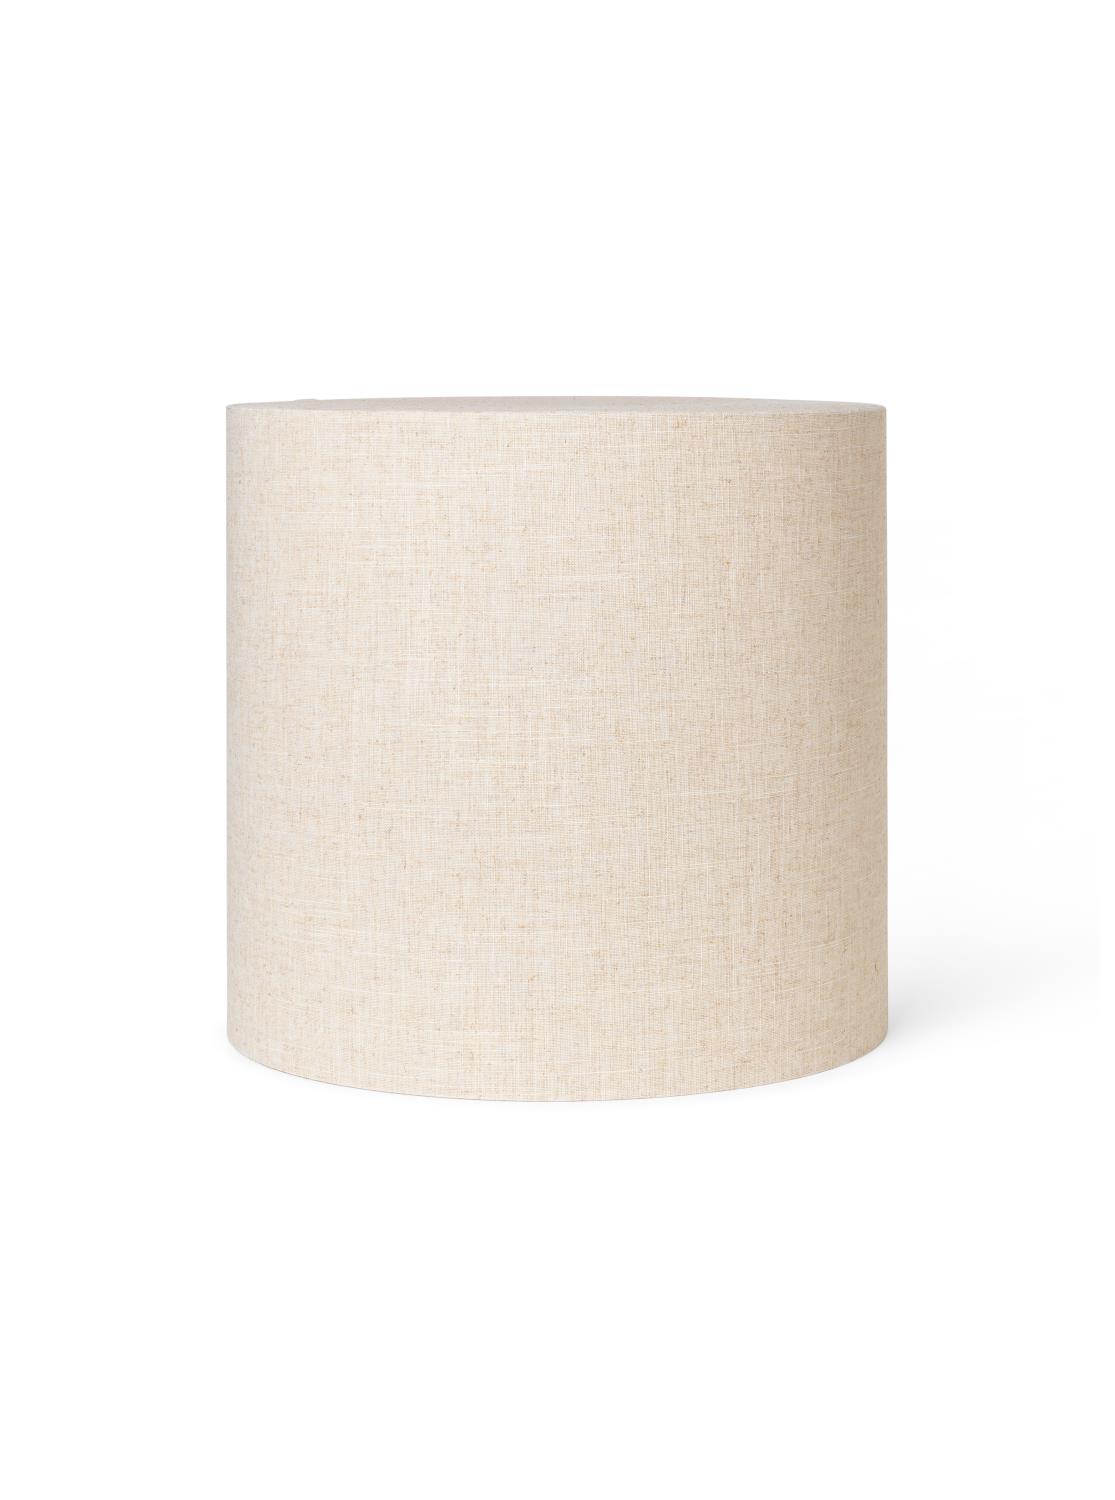 Ferm Living - Eclipse Lampshade - Large - Natural